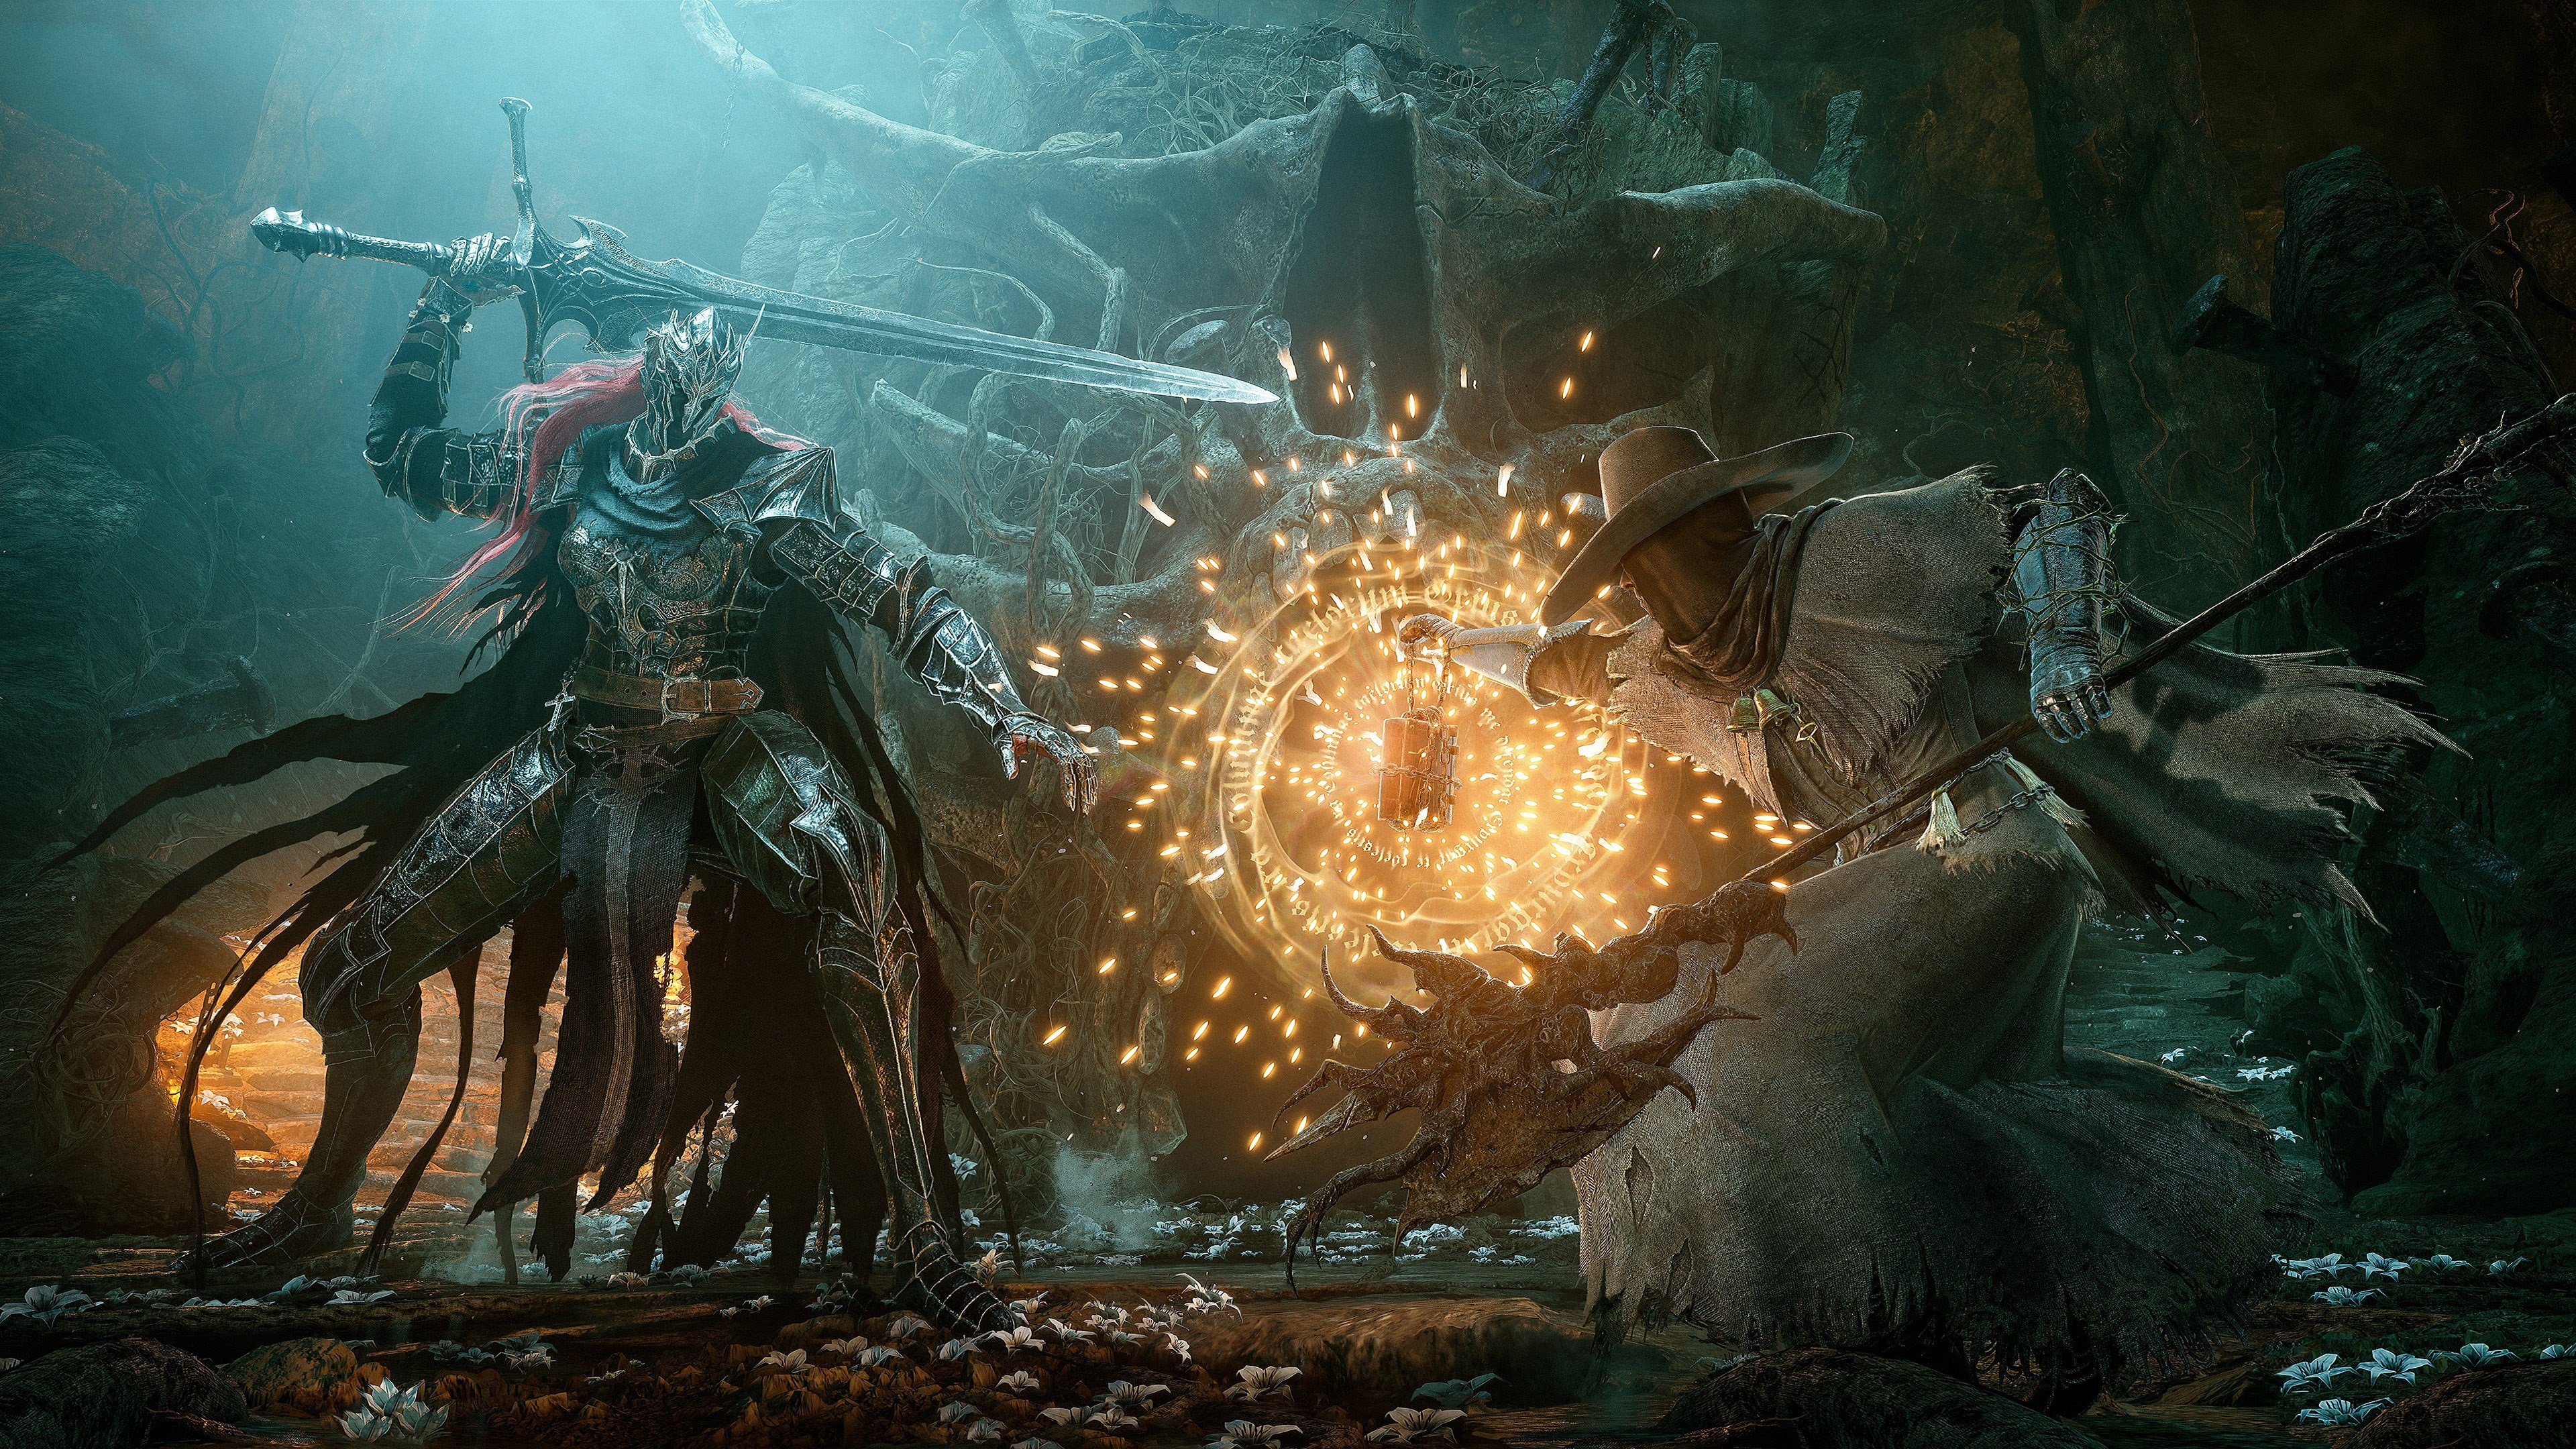 How to Get Lords of The Fallen Early Access? Is Lords of The Fallen Out?  How to Play Lords of The Fallen? - News